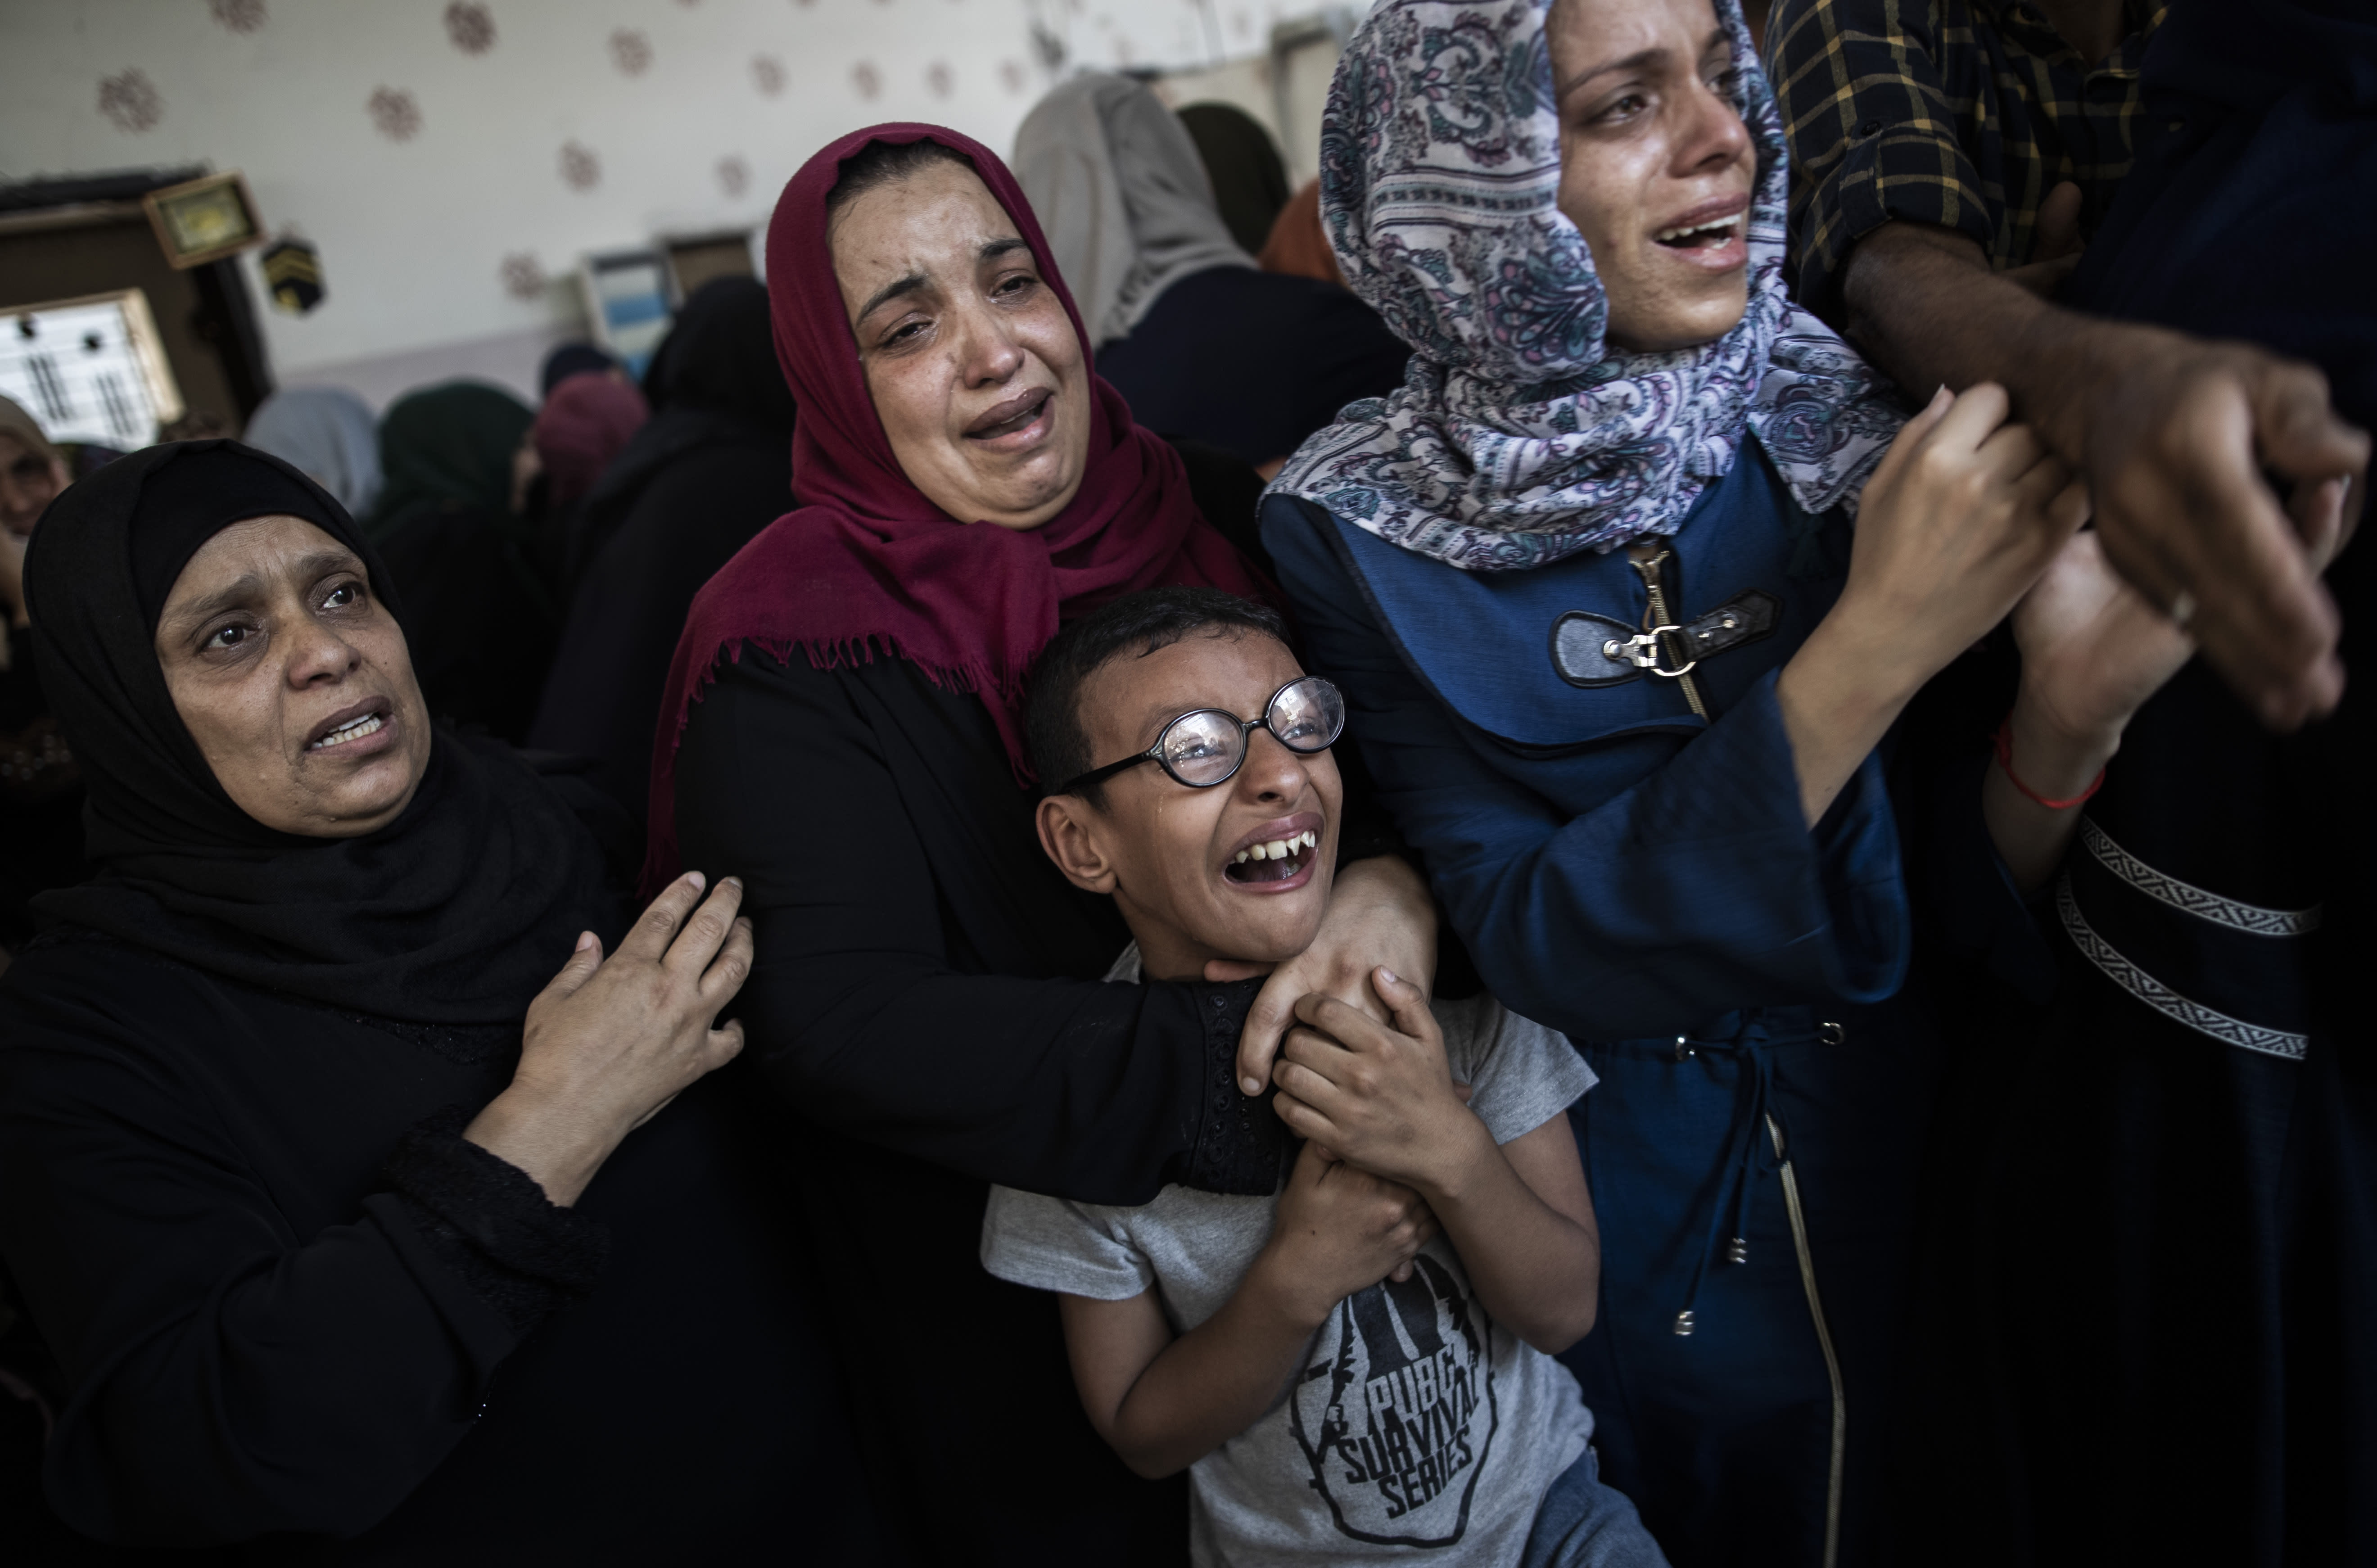 Relatives mourn the death of Palestinian Hamas militant, Mohammad Abu Namous, 27, in the family home during his funeral in the Jabaliya refugee camp, northern Gaza Strip, Sunday, Aug. 18, 2019. Gaza's Health Ministry said Israeli troops killed three Palestinians and severely wounded a fourth near the heavily guarded perimeter fence. The Israeli military said Sunday that a helicopter and a tank fired at a group of armed suspects near the fence overnight. (AP Photo/Khalil Hamra)